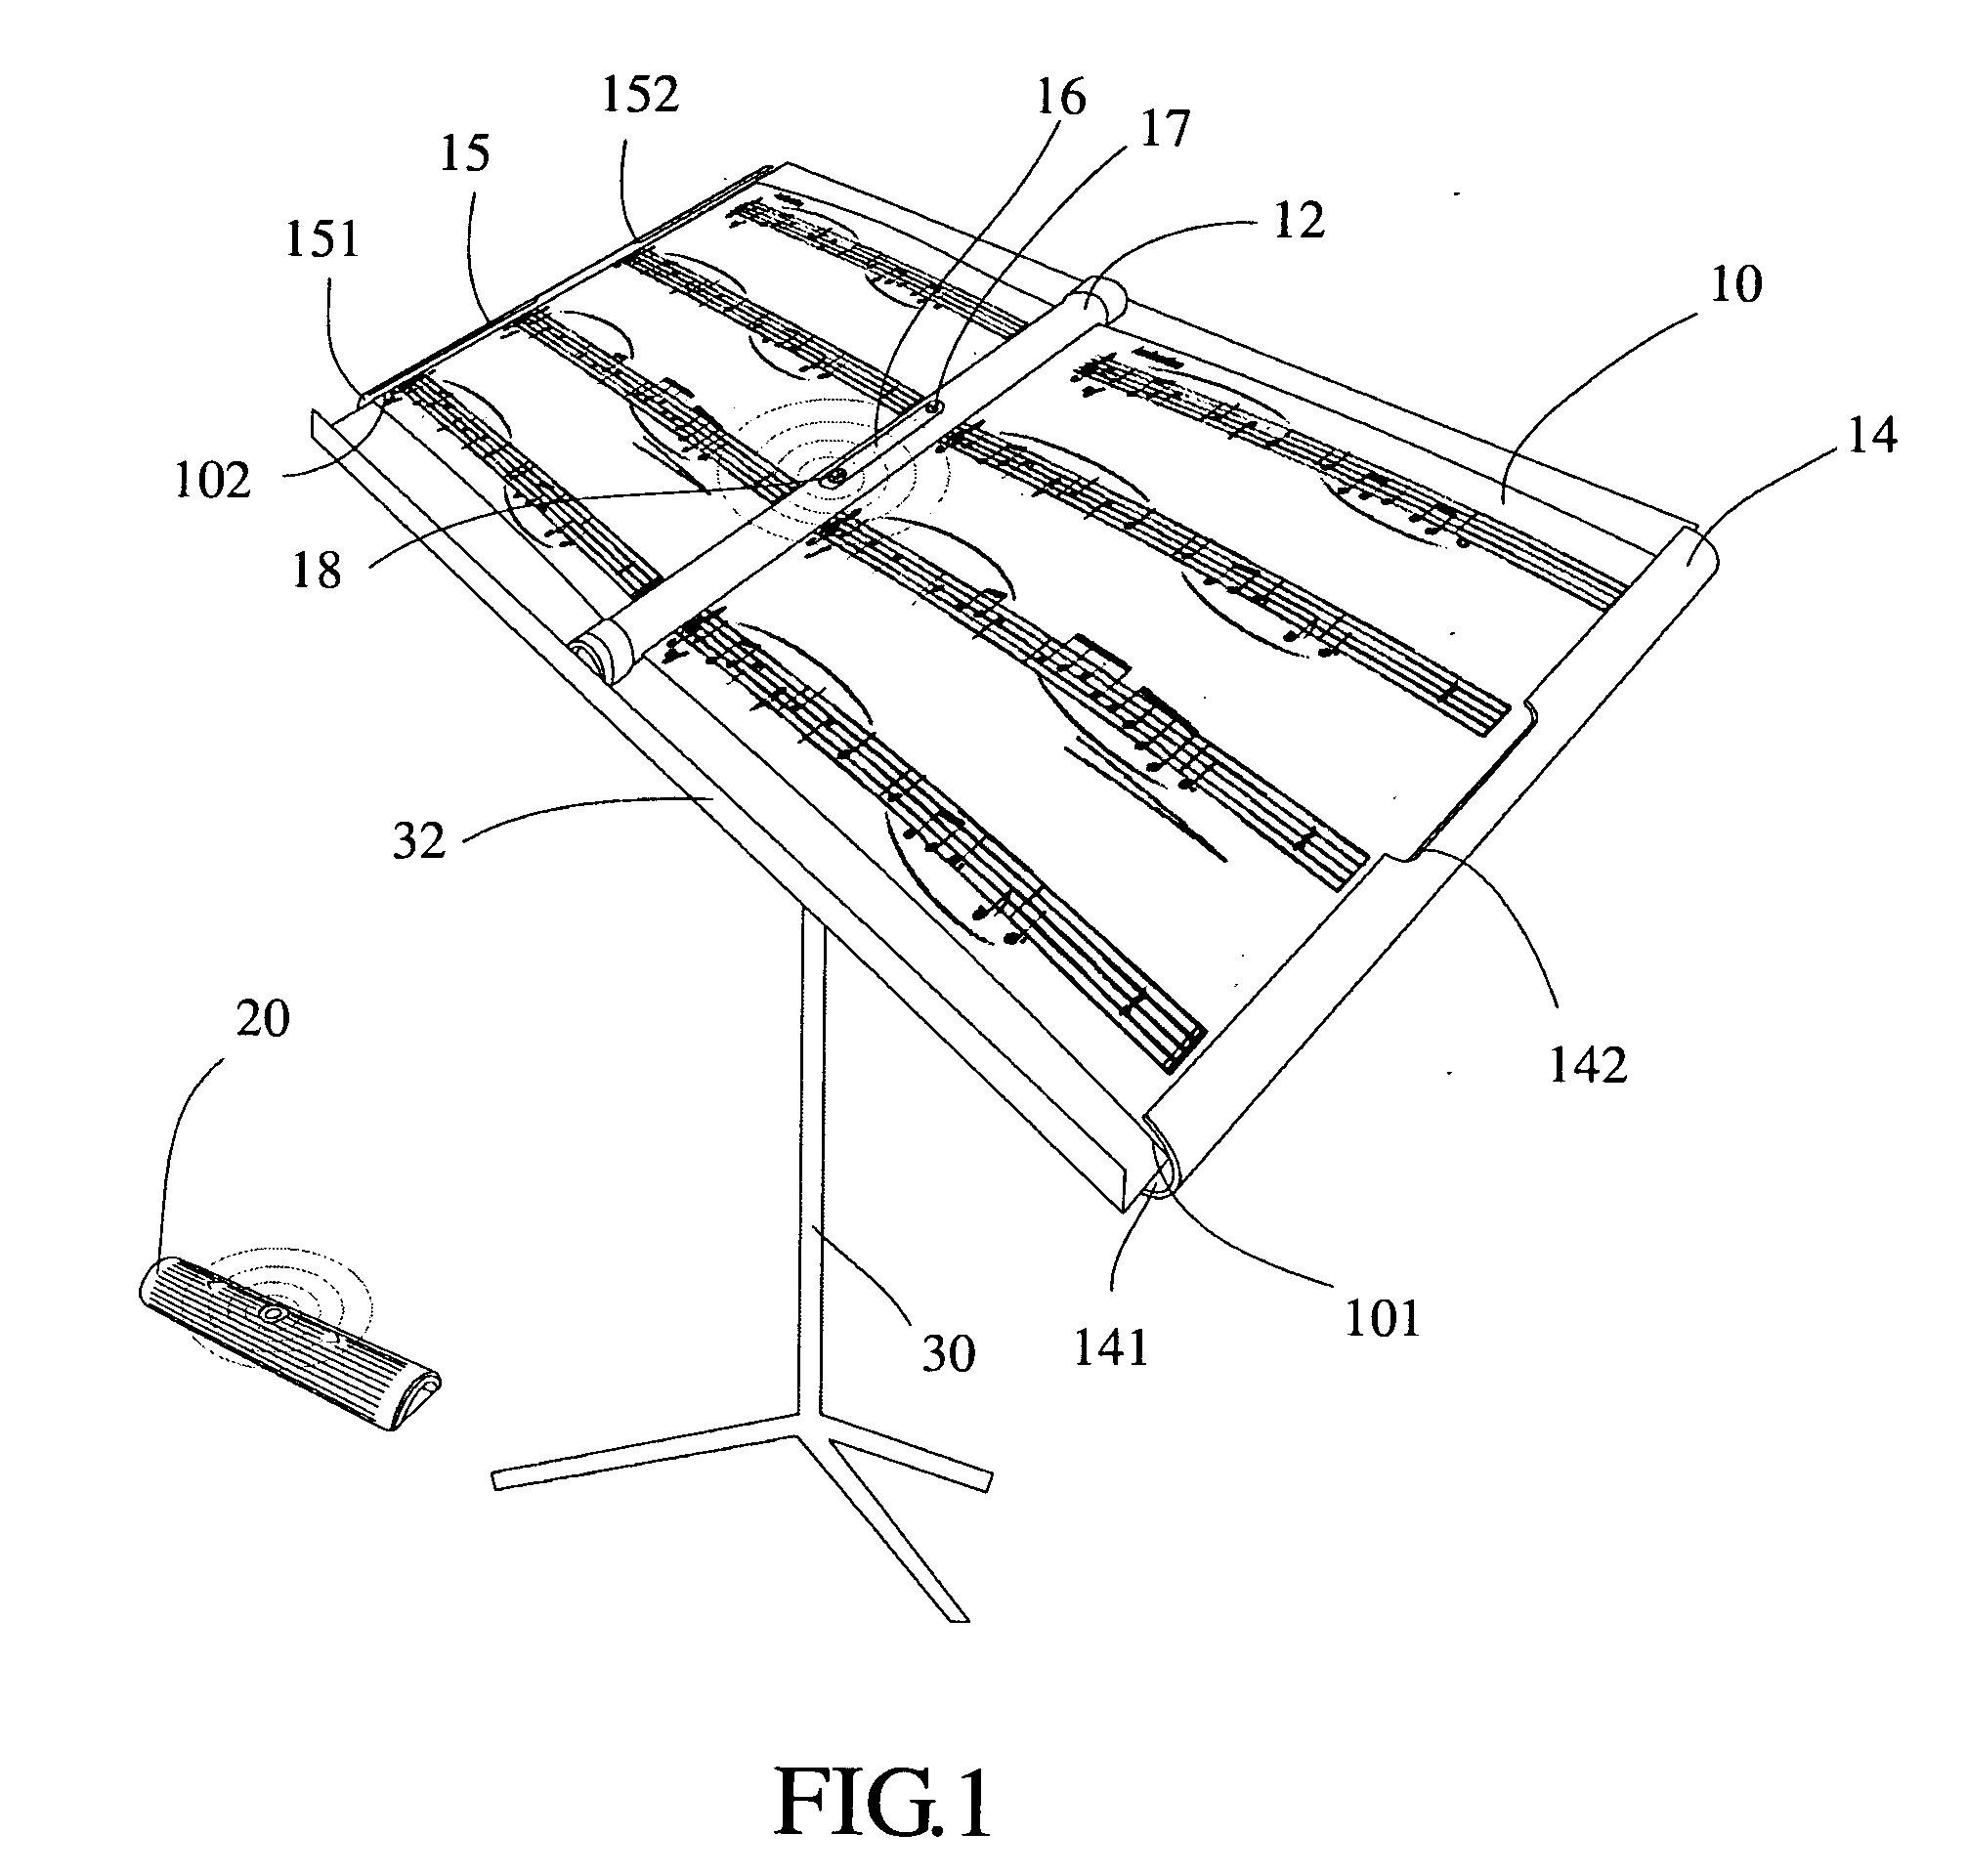 Electronic musical score display device